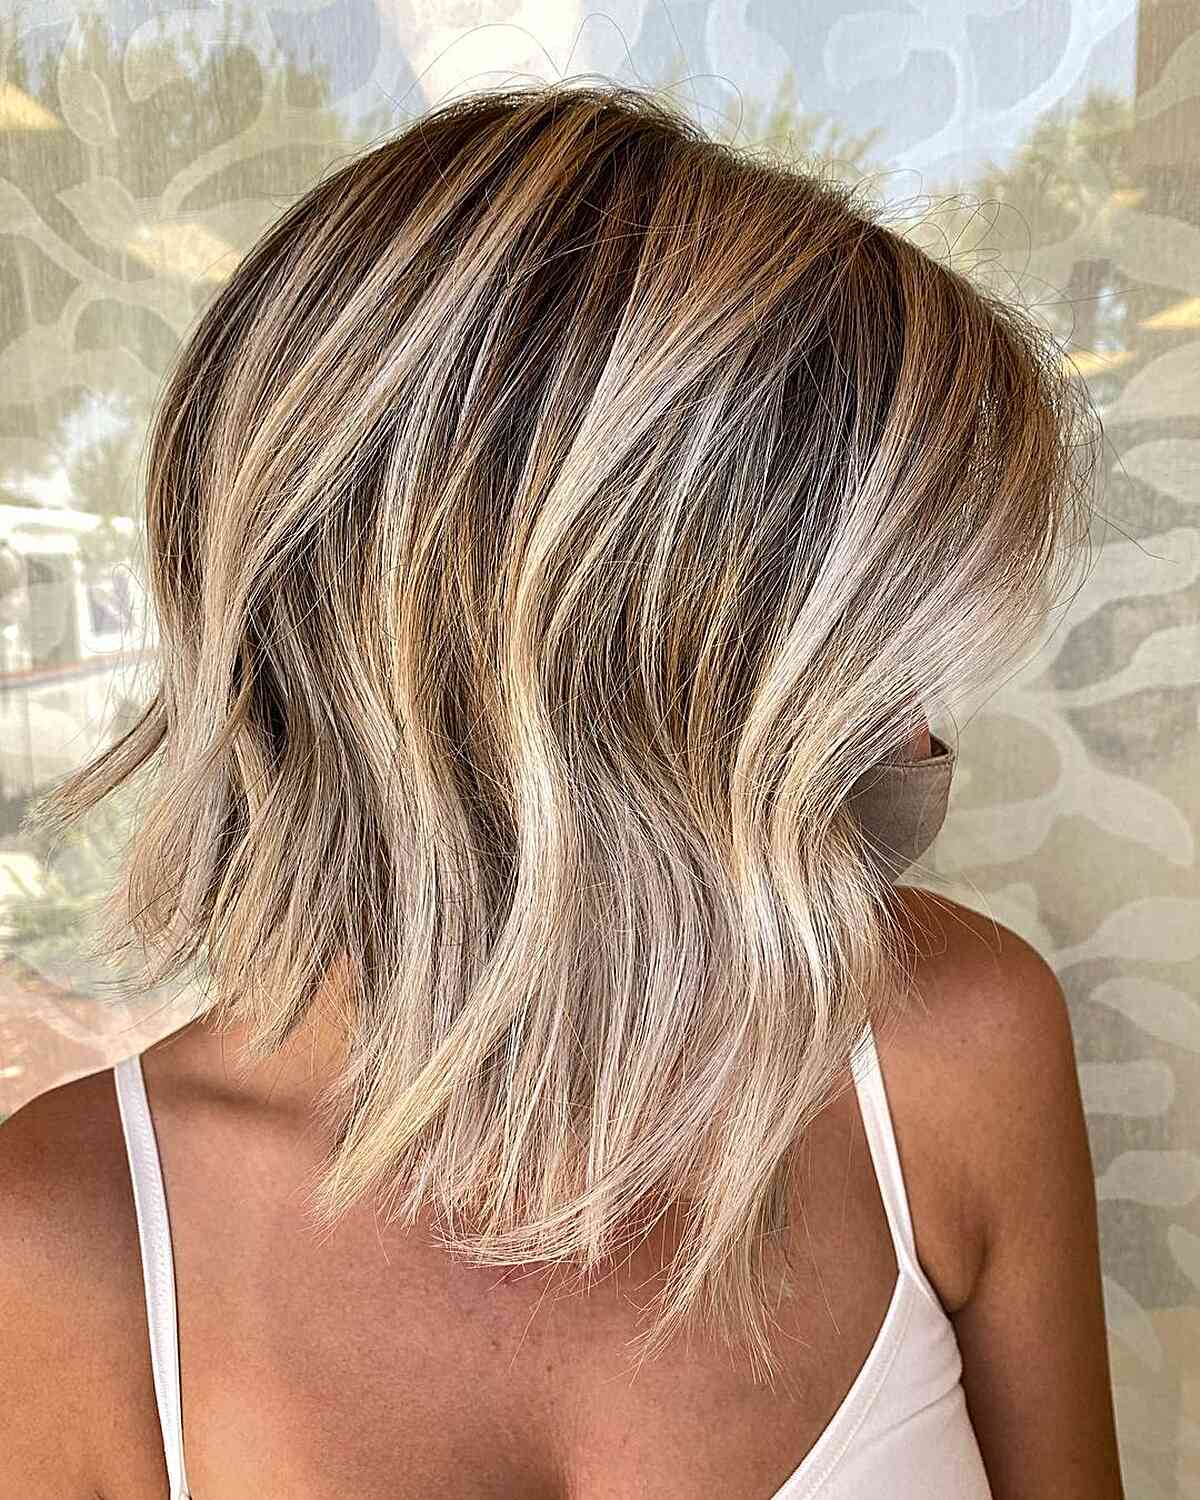 Messy Straight Balayage Hair with Dark Roots for women with short hair